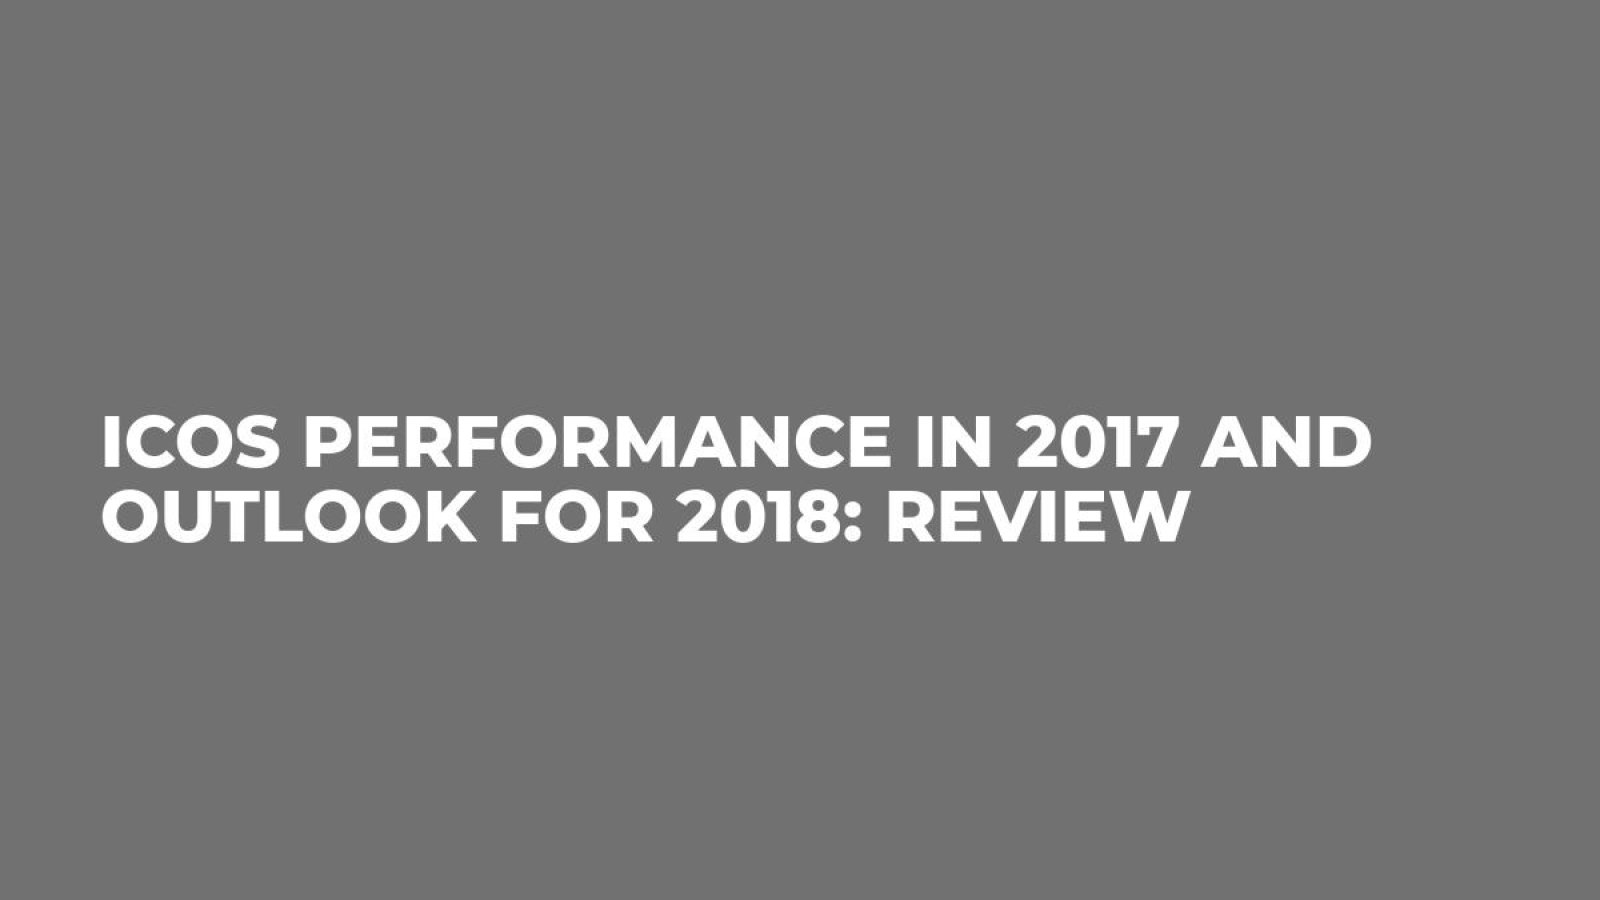 ICOs Performance in 2017 and Outlook For 2018: Review